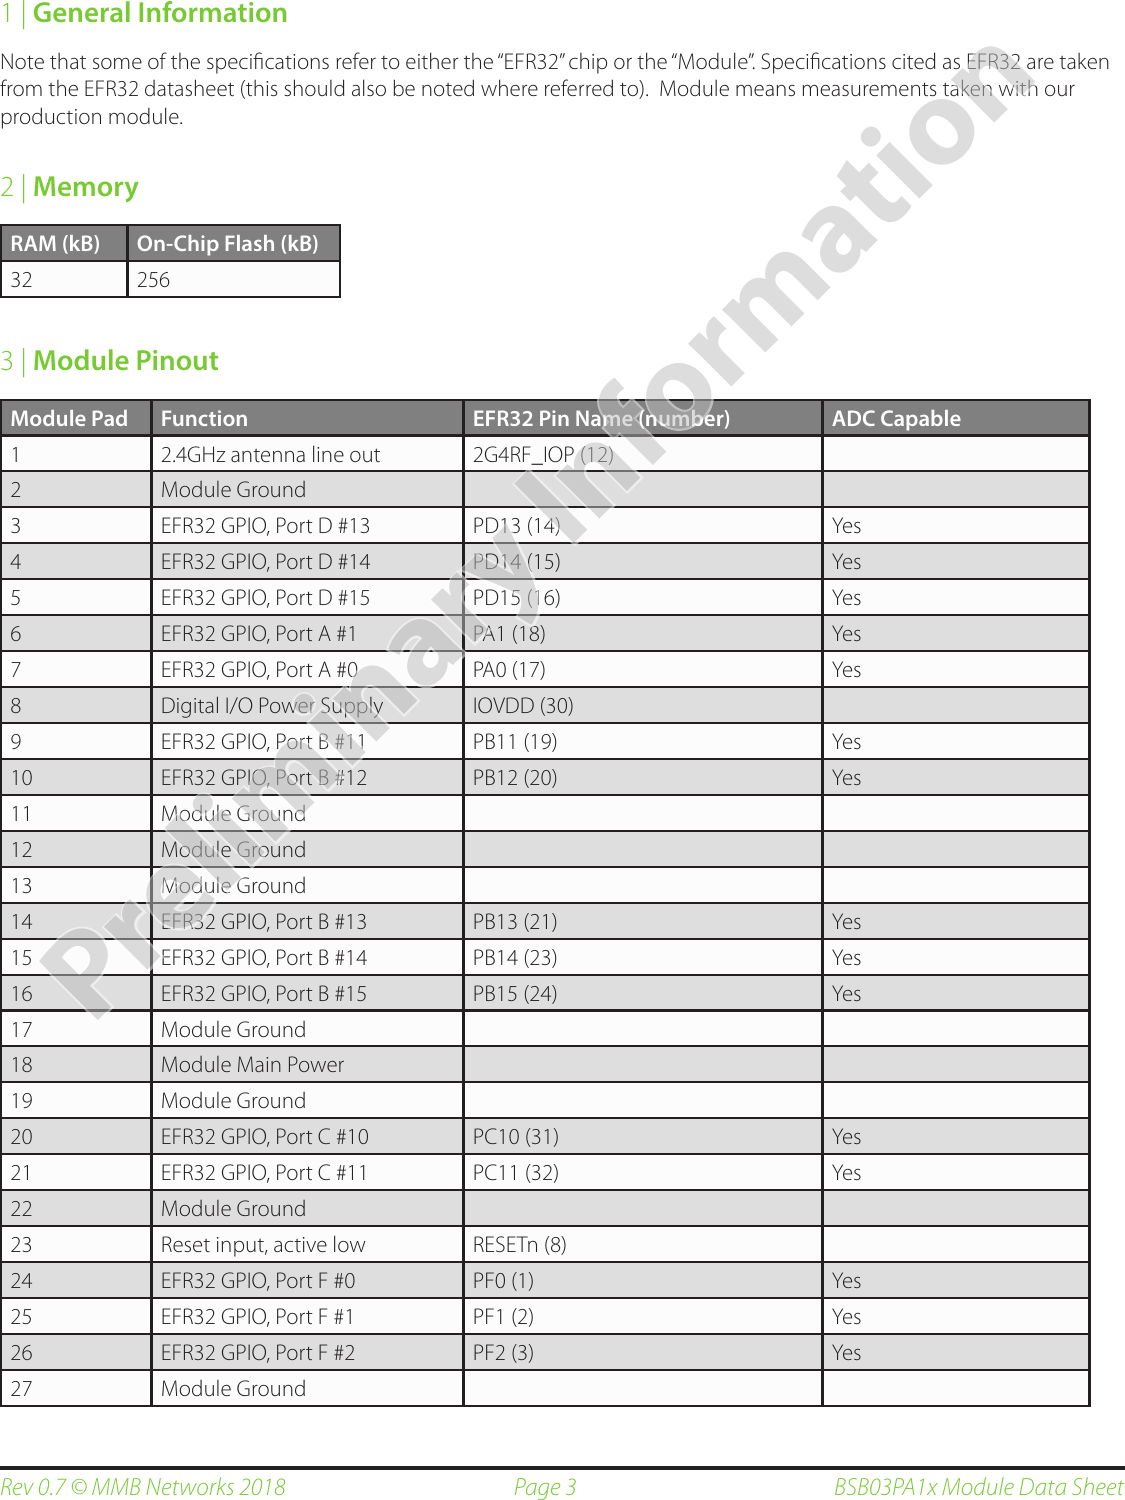 Page 3Rev 0.7 © MMB Networks 2018 BSB03PA1x Module Data Sheet1 | General InformationNote that some of the speciﬁcations refer to either the “EFR32” chip or the “Module”. Speciﬁcations cited as EFR32 are taken from the EFR32 datasheet (this should also be noted where referred to).  Module means measurements taken with our production module.2 | Memory3 | Module PinoutRAM (kB) On-Chip Flash (kB)32 256Module Pad Function EFR32 Pin Name (number) ADC Capable1 2.4GHz antenna line out 2G4RF_IOP (12)2 Module Ground3 EFR32 GPIO, Port D #13 PD13 (14) Yes4 EFR32 GPIO, Port D #14 PD14 (15) Yes5 EFR32 GPIO, Port D #15 PD15 (16) Yes6 EFR32 GPIO, Port A #1 PA1 (18) Yes7 EFR32 GPIO, Port A #0 PA0 (17) Yes8 Digital I/O Power Supply IOVDD (30)9 EFR32 GPIO, Port B #11 PB11 (19) Yes10 EFR32 GPIO, Port B #12 PB12 (20) Yes11 Module Ground12 Module Ground13 Module Ground14 EFR32 GPIO, Port B #13 PB13 (21) Yes15 EFR32 GPIO, Port B #14 PB14 (23) Yes16 EFR32 GPIO, Port B #15 PB15 (24) Yes17 Module Ground18 Module Main Power19 Module Ground20 EFR32 GPIO, Port C #10 PC10 (31) Yes21 EFR32 GPIO, Port C #11 PC11 (32) Yes22 Module Ground23 Reset input, active low RESETn (8)24 EFR32 GPIO, Port F #0 PF0 (1) Yes25 EFR32 GPIO, Port F #1 PF1 (2) Yes26 EFR32 GPIO, Port F #2 PF2 (3) Yes27 Module GroundPreliminary Information